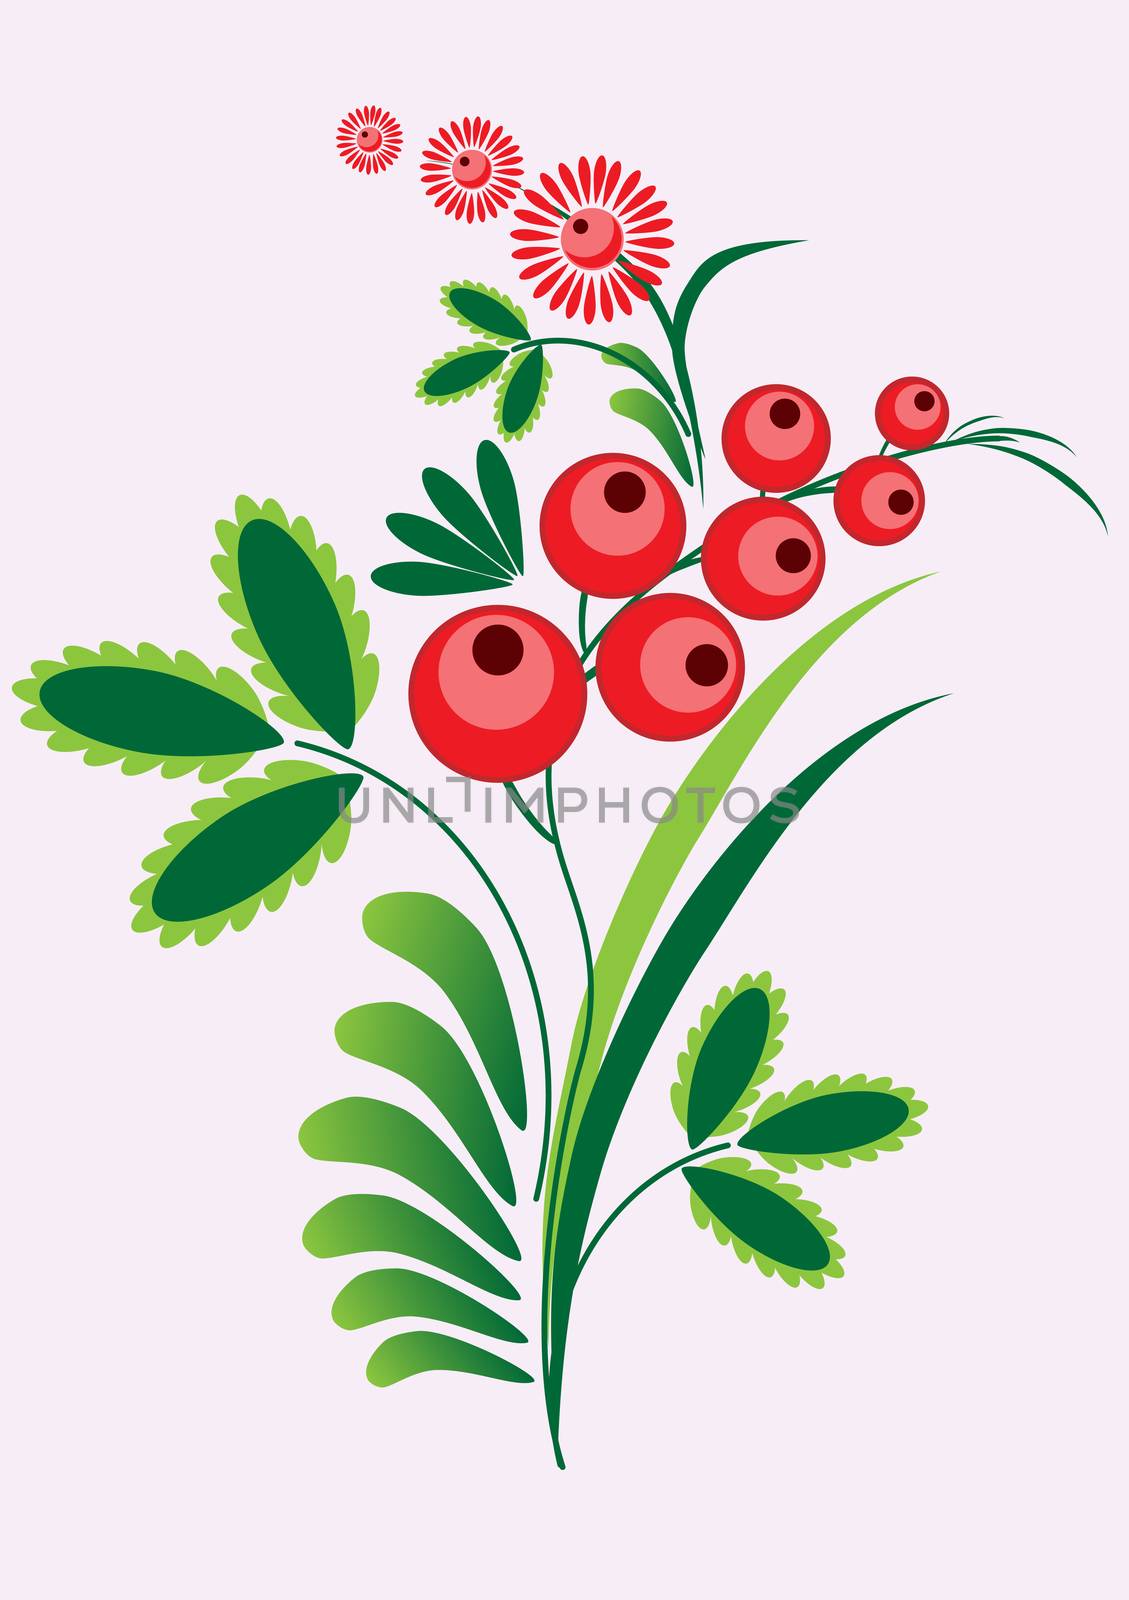 Rowan berries branch with berrie and leaves on white background. illustration